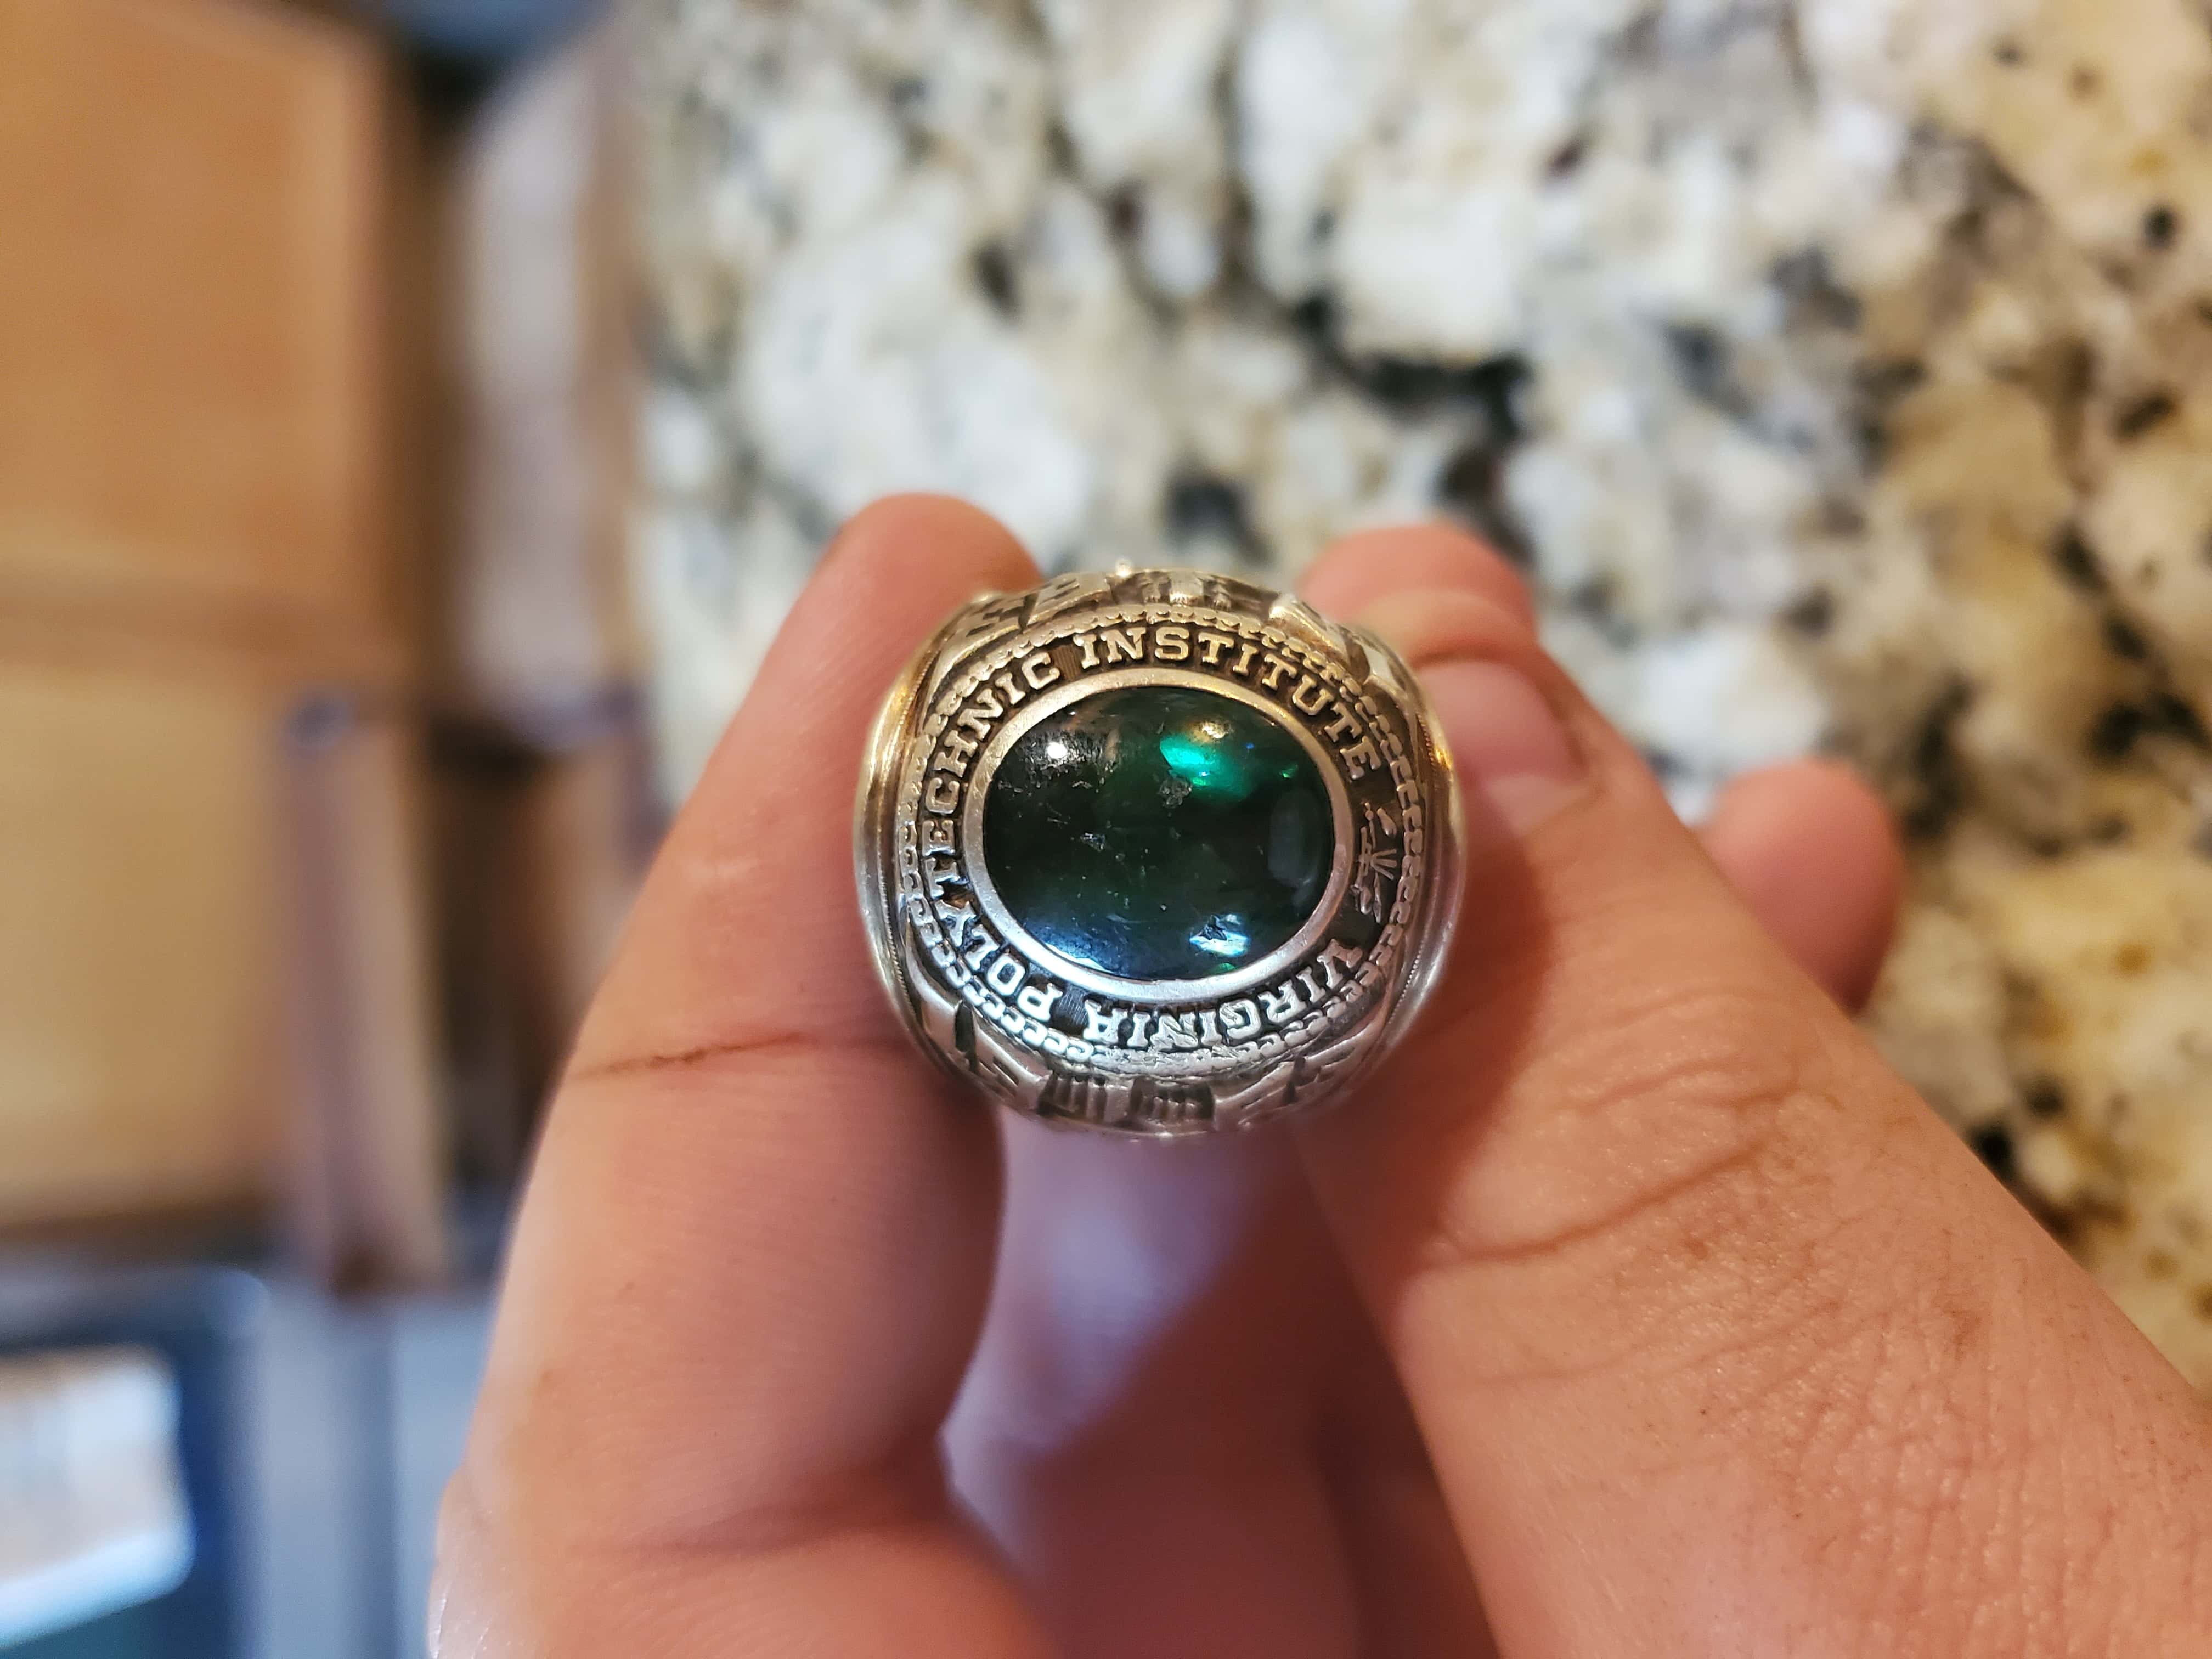 Image of Ring Held Between Forefinger and Thumb with Beautiful Green Colored Gemstone or Emerald at Center and Virginia Polytechnic Institute Around the Edge with Other Details Visible at Edge and Bezel